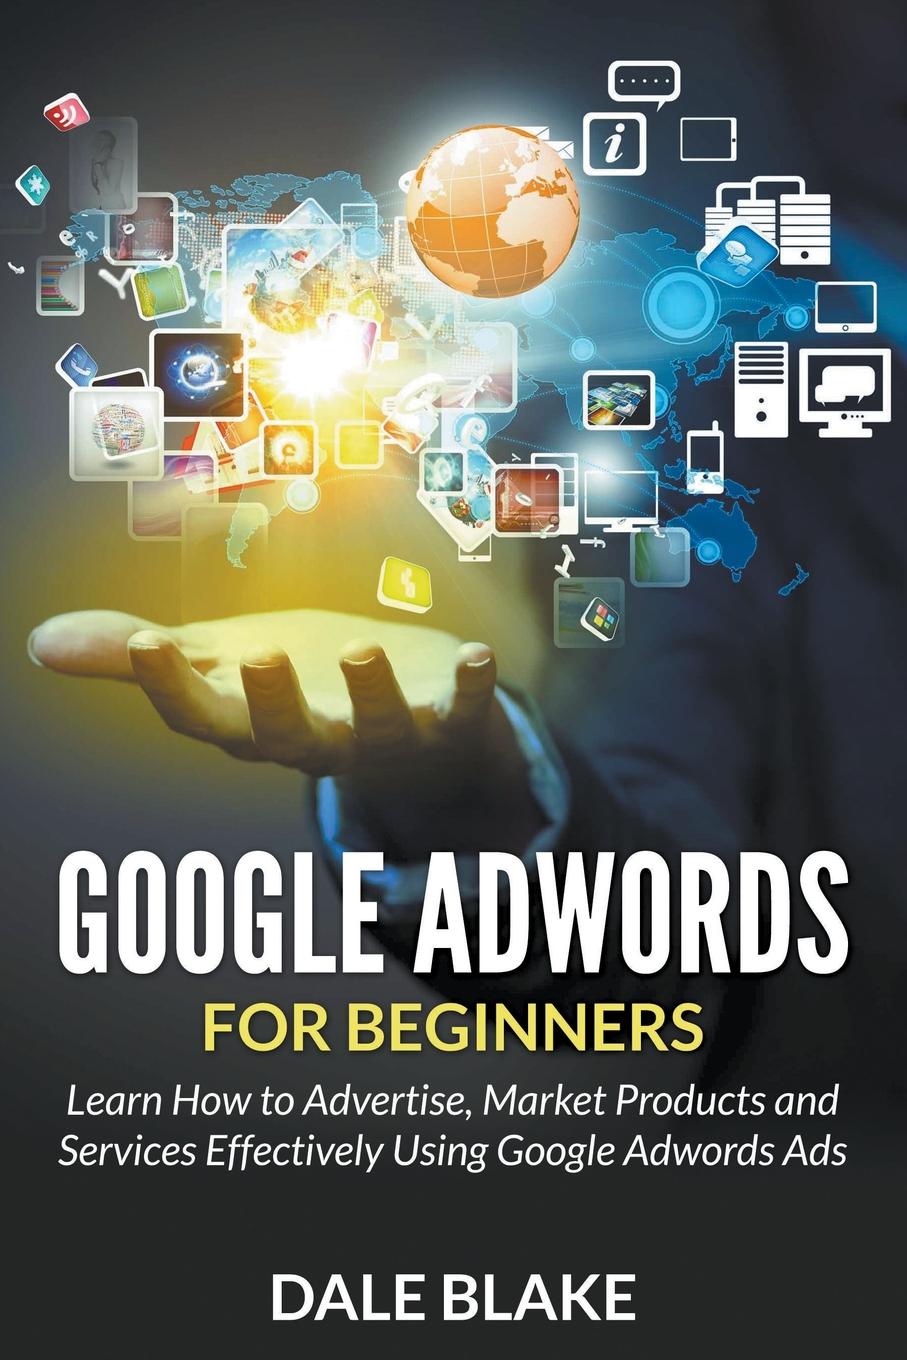 Dale Blake Google Adwords For Beginners. Learn How to Advertise, Market Products and Services Effectively Using Google Adwords Ads